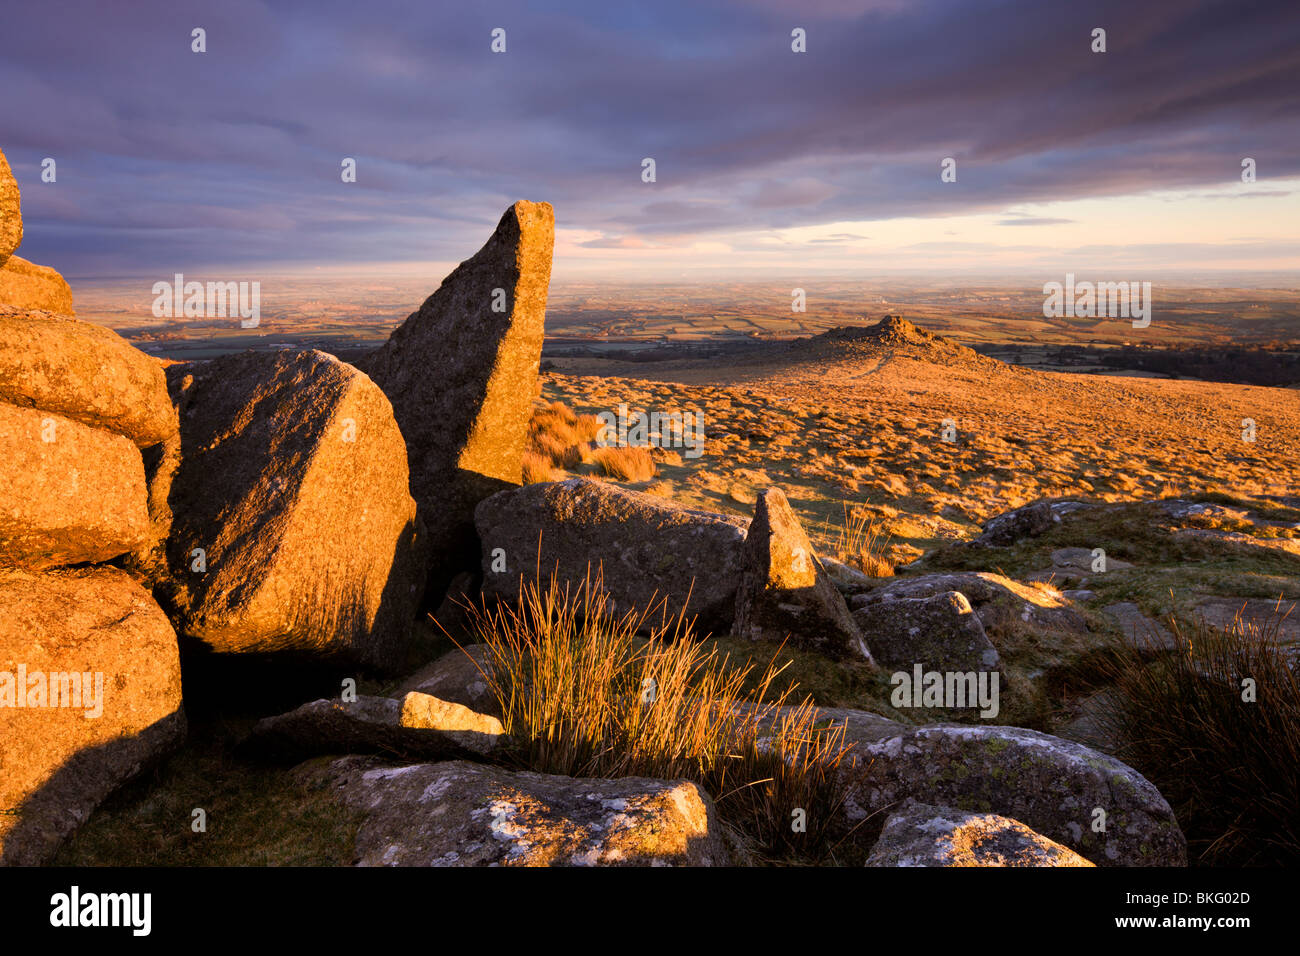 Golden sunshine glows against the granite outcrops at Belstone Tor, Dartmoor National Park, Devon, England. Stock Photo